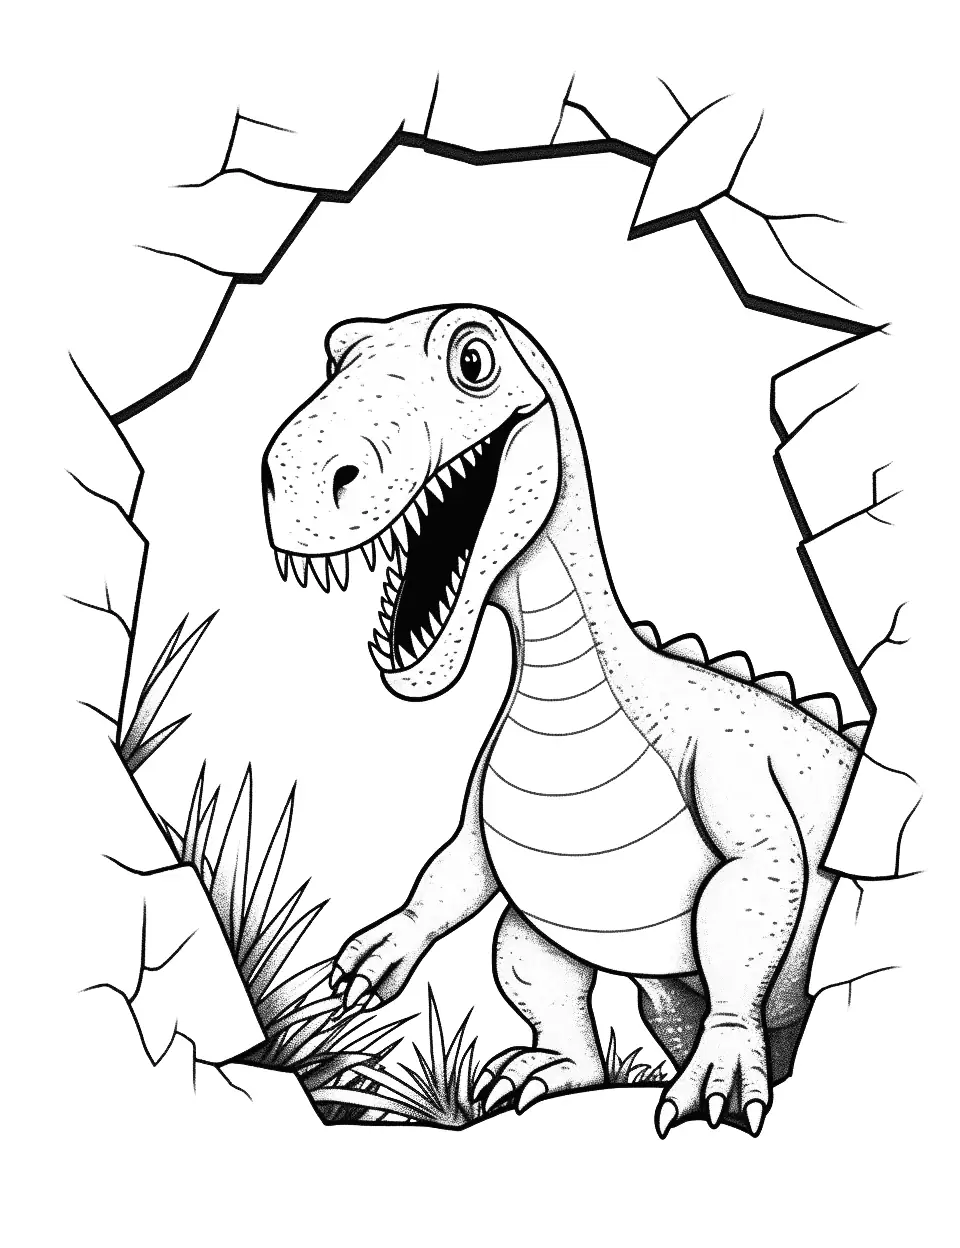 Indominus Rex Escape Coloring Page - The Indominus Rex breaking free from its enclosure.